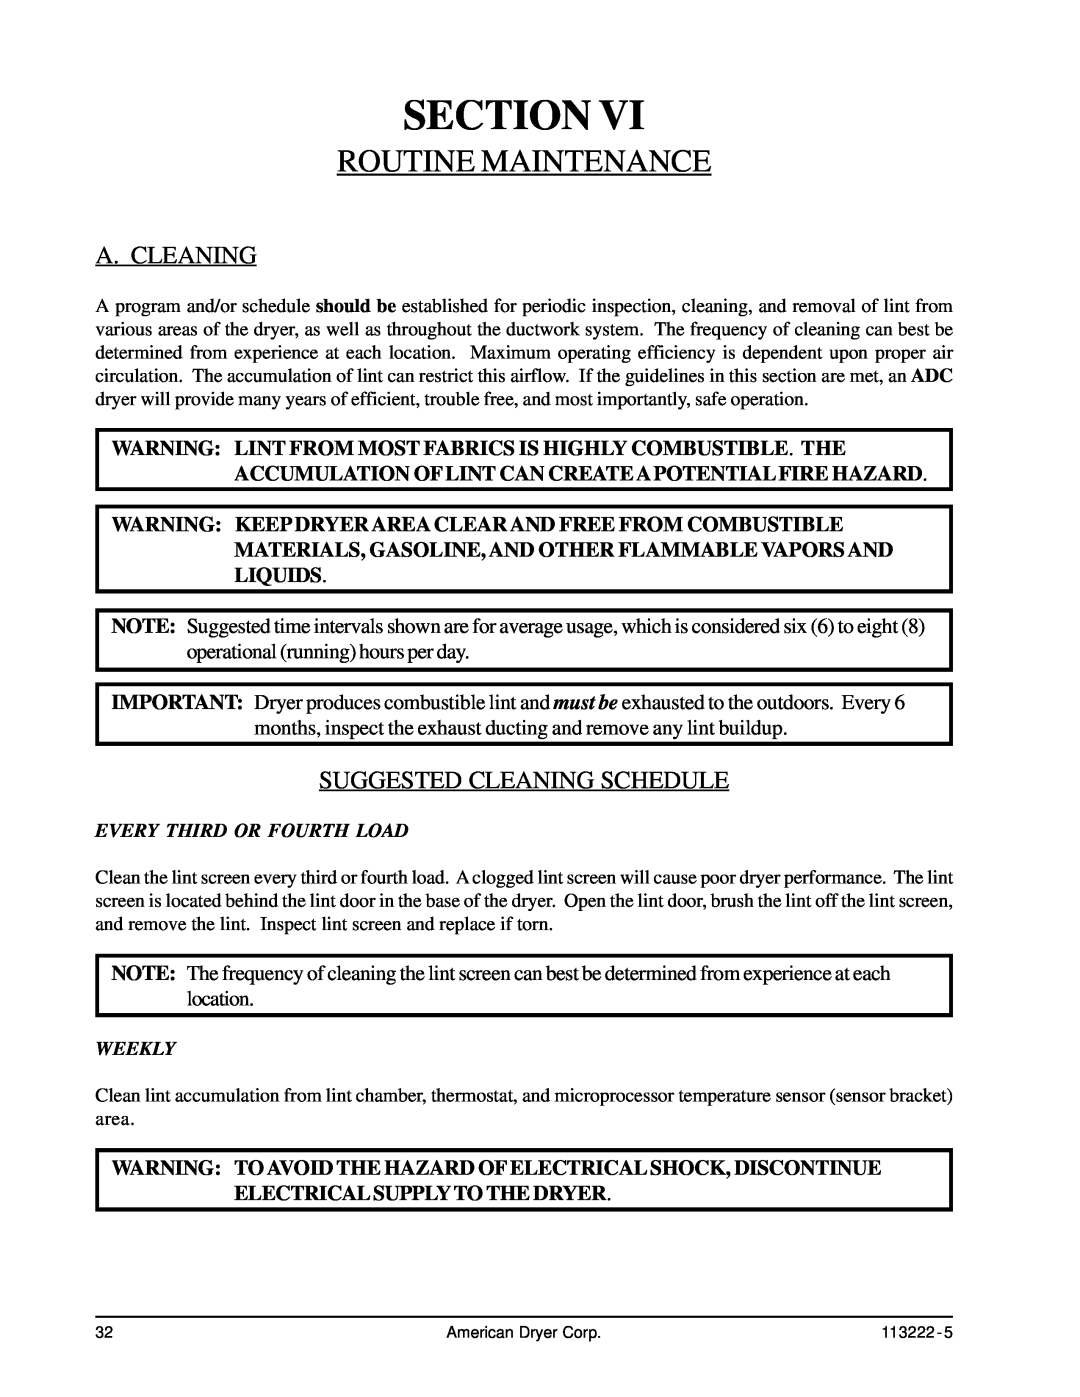 American Dryer Corp AD-24 Phase 7 Routine Maintenance, Section, A. Cleaning, Suggested Cleaning Schedule 